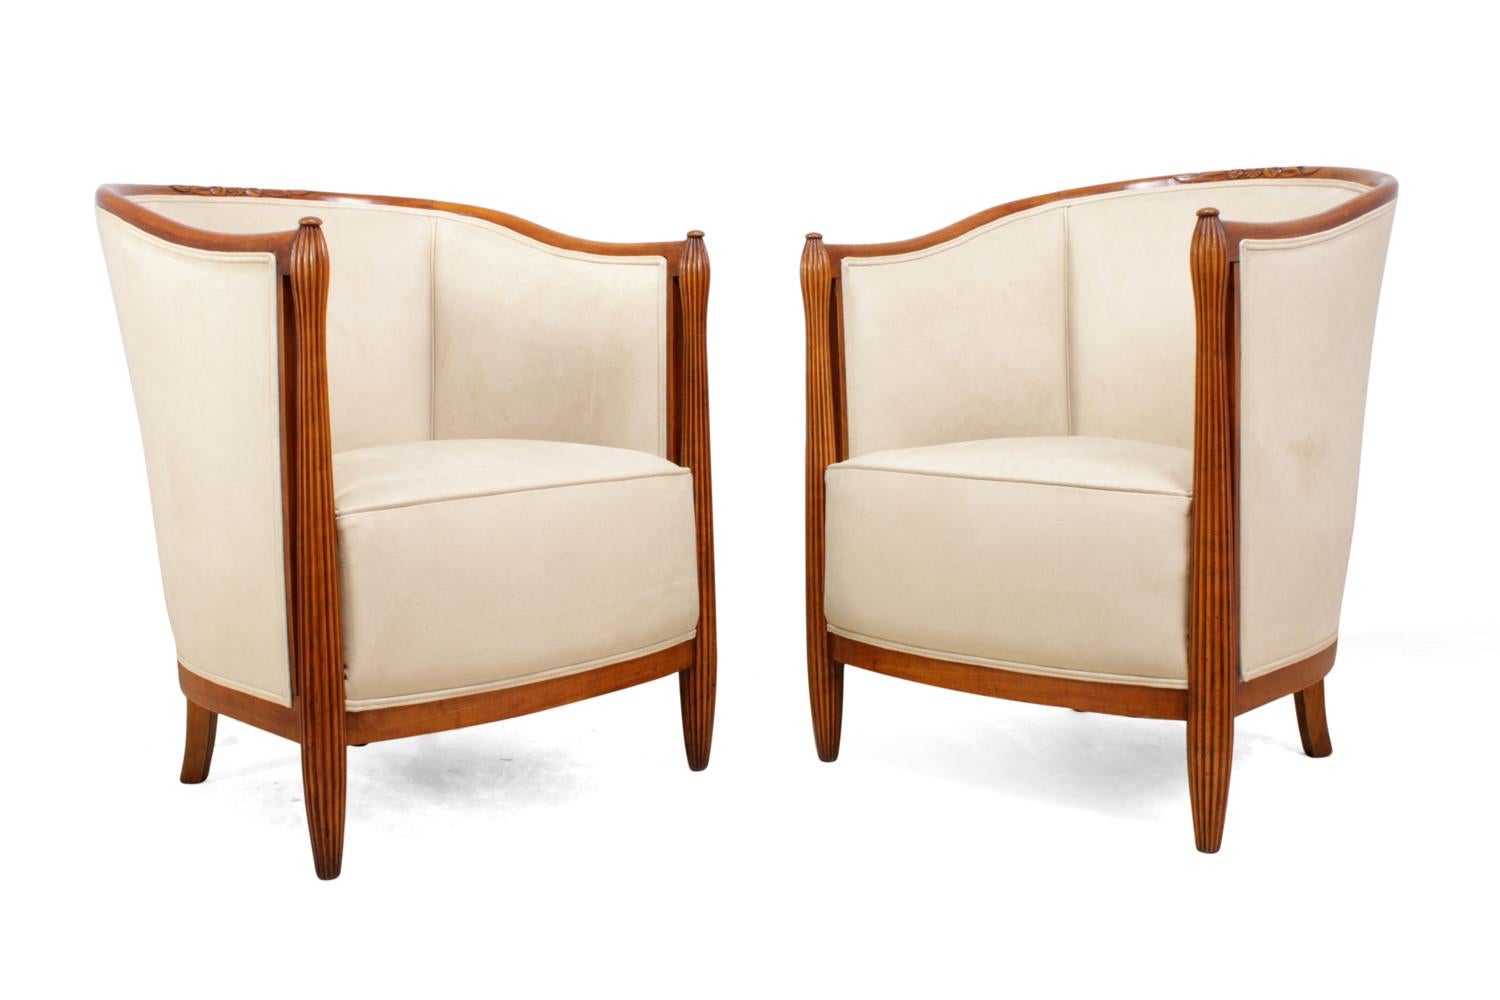 Early 20th Century Pair of French Art Deco Salon Chairs by Paul Folllot, circa 1925